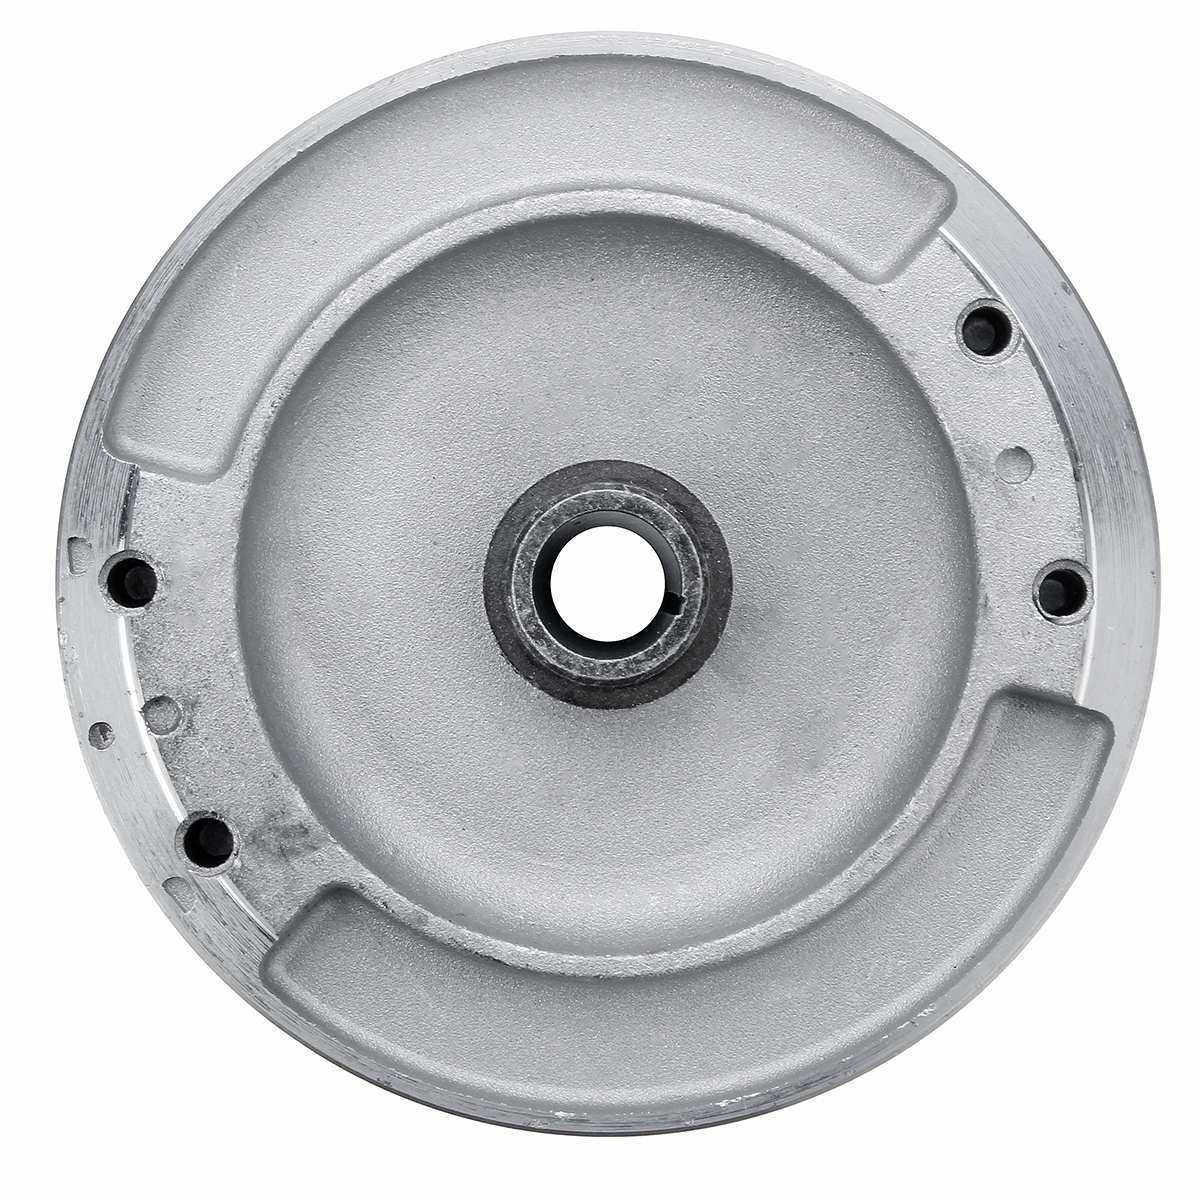 OEM-11224001217-Replacement-Flywheel-Coil-NGK-Plug-for-Stihl-Electric-Chainsaw-066-MS660-1631889-5